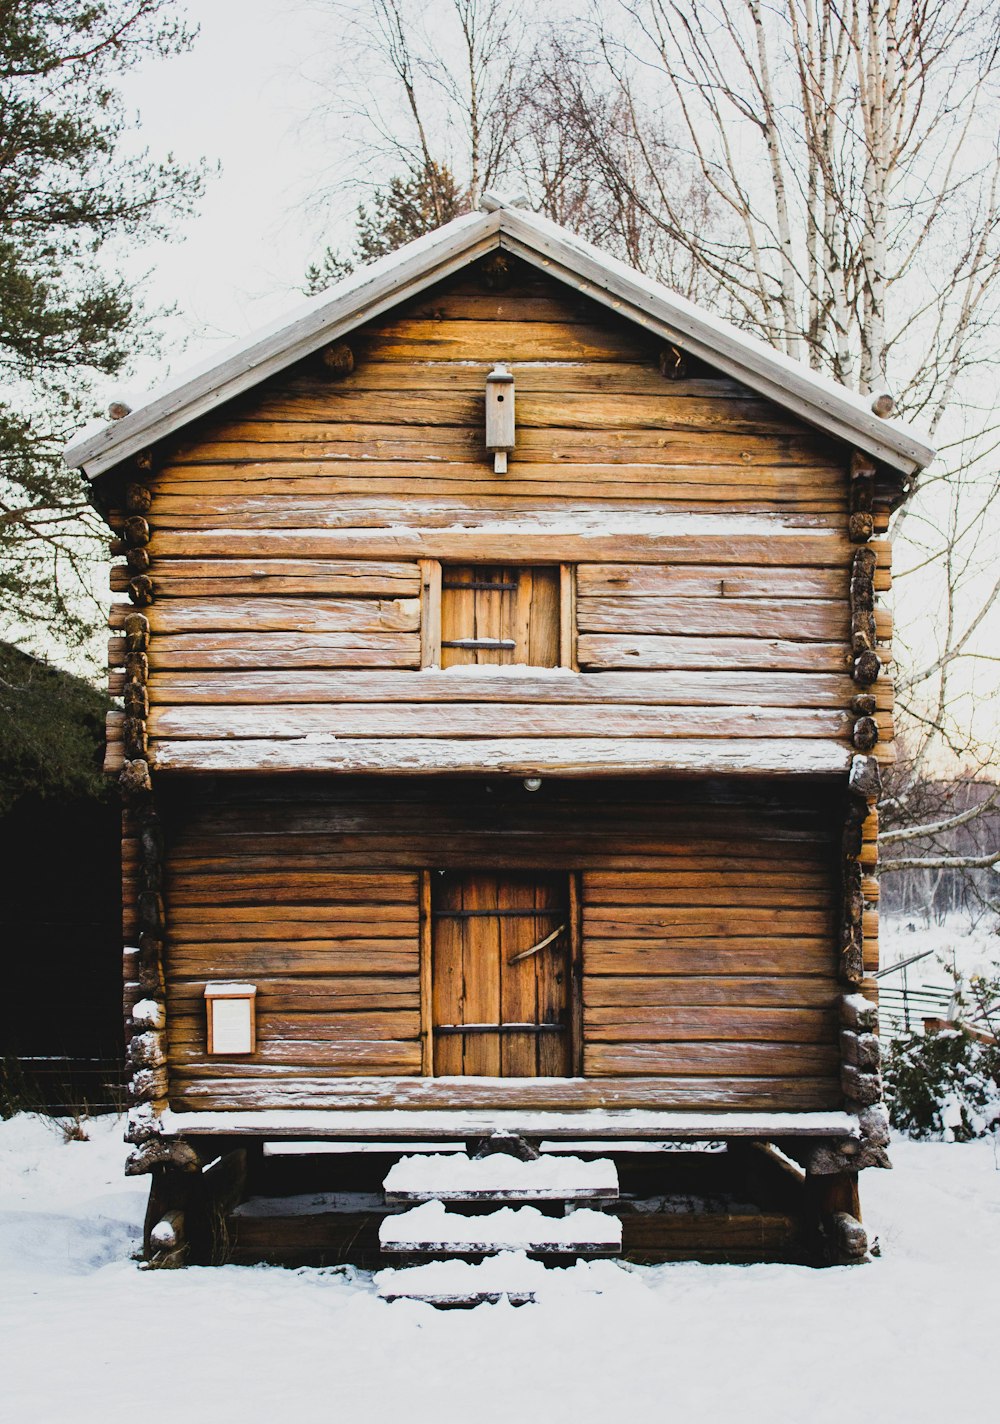 brown wooden house during winter season